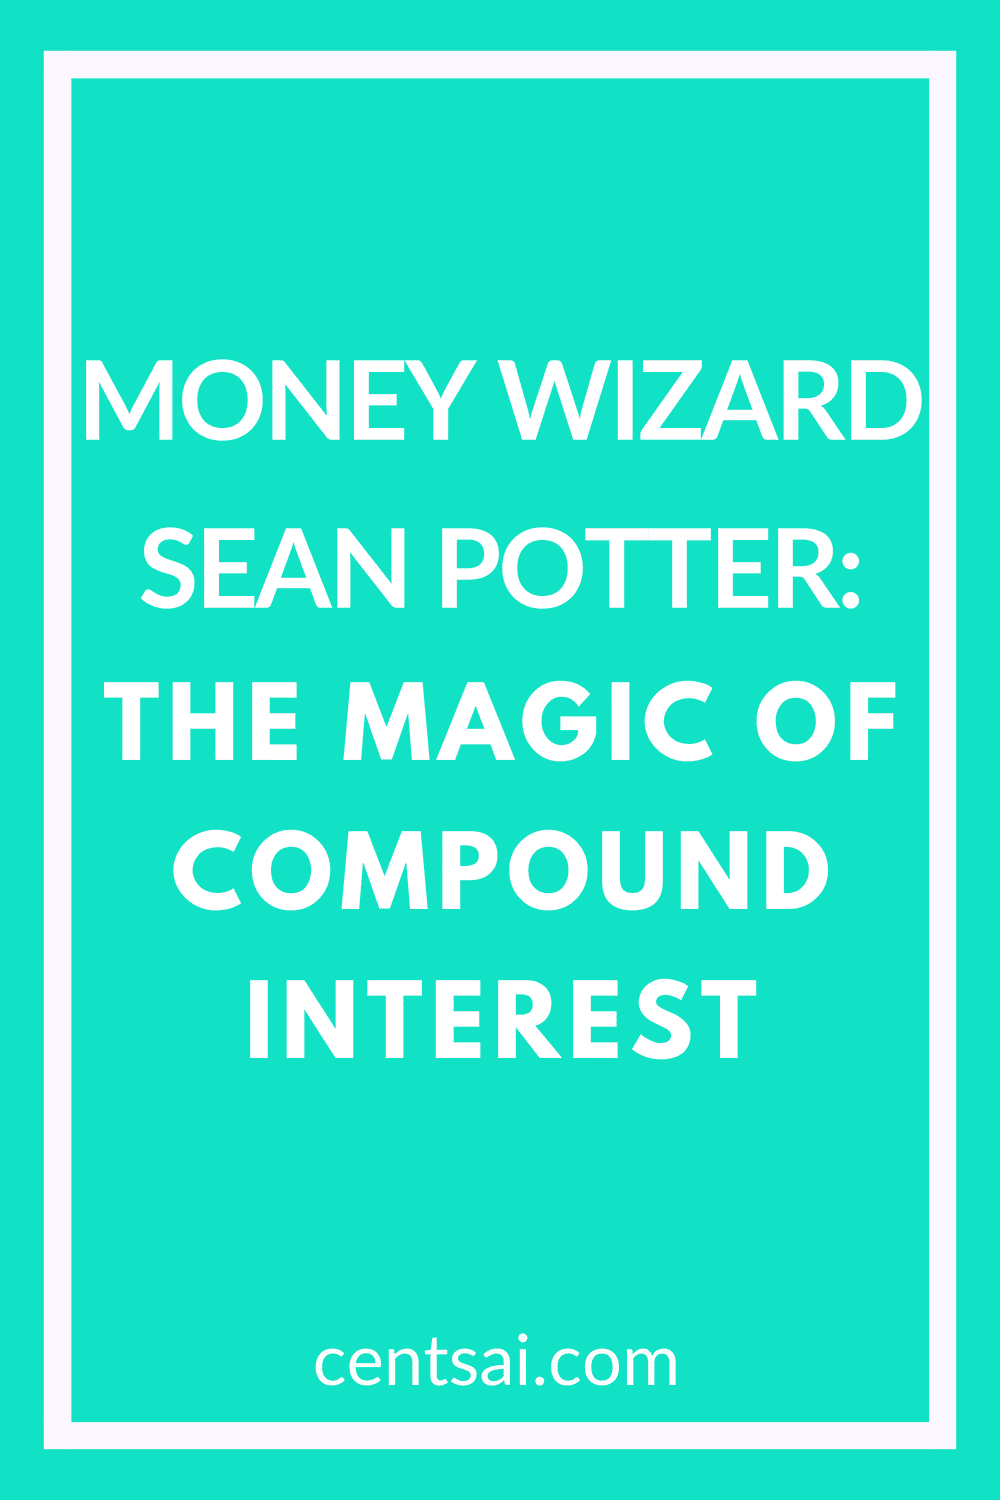 Money Wizard Sean Potter: The Magic of Compound Interest. My Money Wizard blogger Sean Potter discusses childhood money memories and the magic of compound interest. Check out his tips for teaching kids about money. #compoundinterest #money #personalfinance #moneywizard